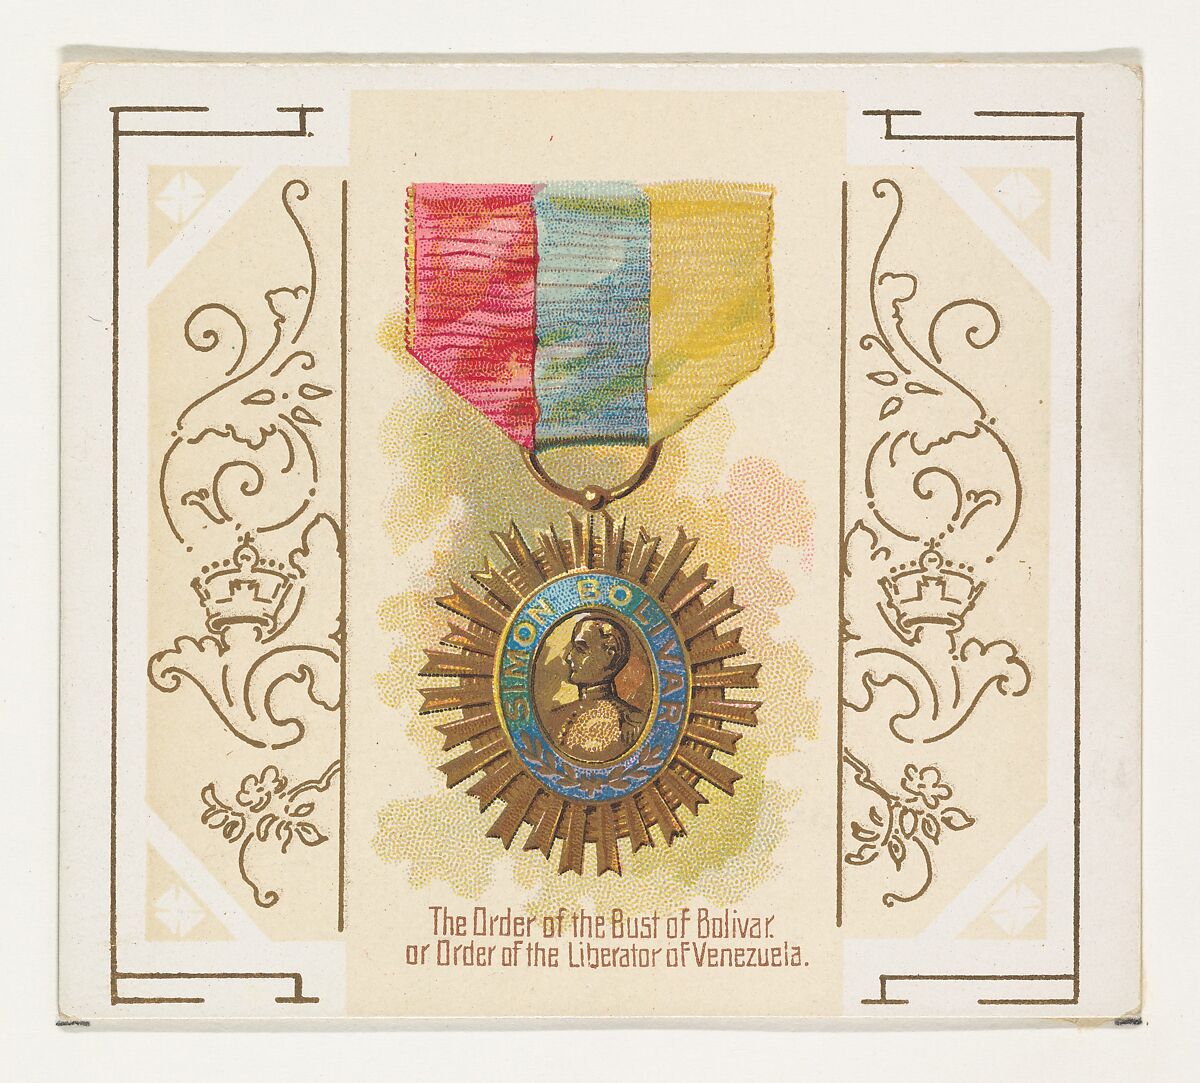 The Order of the Bust of Bolivar, or Order of the Liberator of Venezuela, from the World's Decorations series (N44) for Allen & Ginter Cigarettes, Issued by Allen &amp; Ginter (American, Richmond, Virginia), Commercial color lithograph 